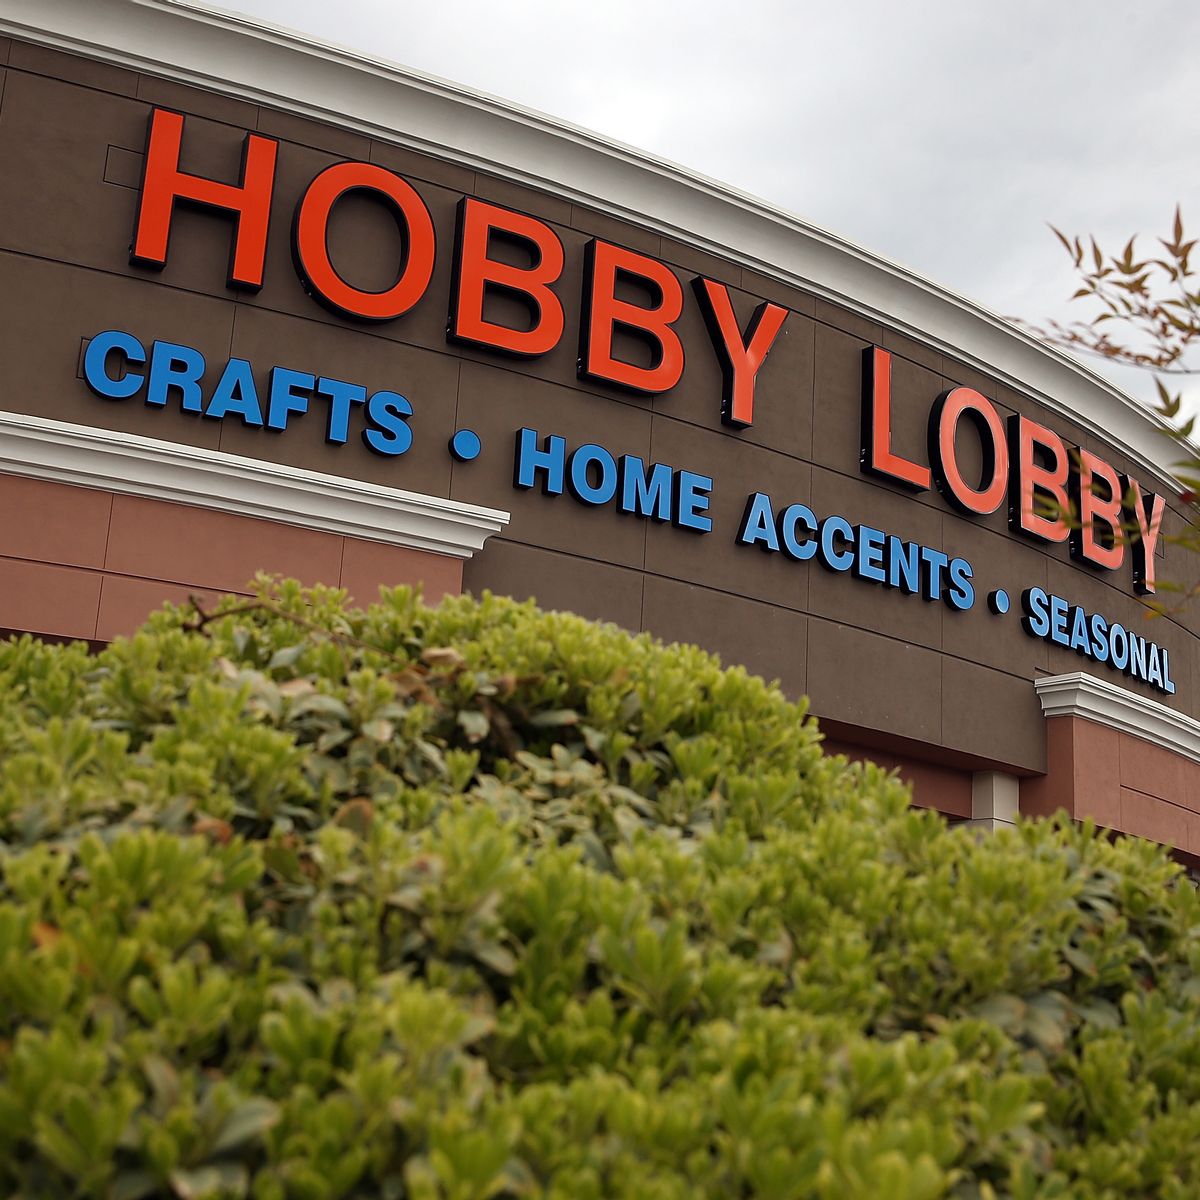 Hobby Lobby affiliate attracts bargain hunters